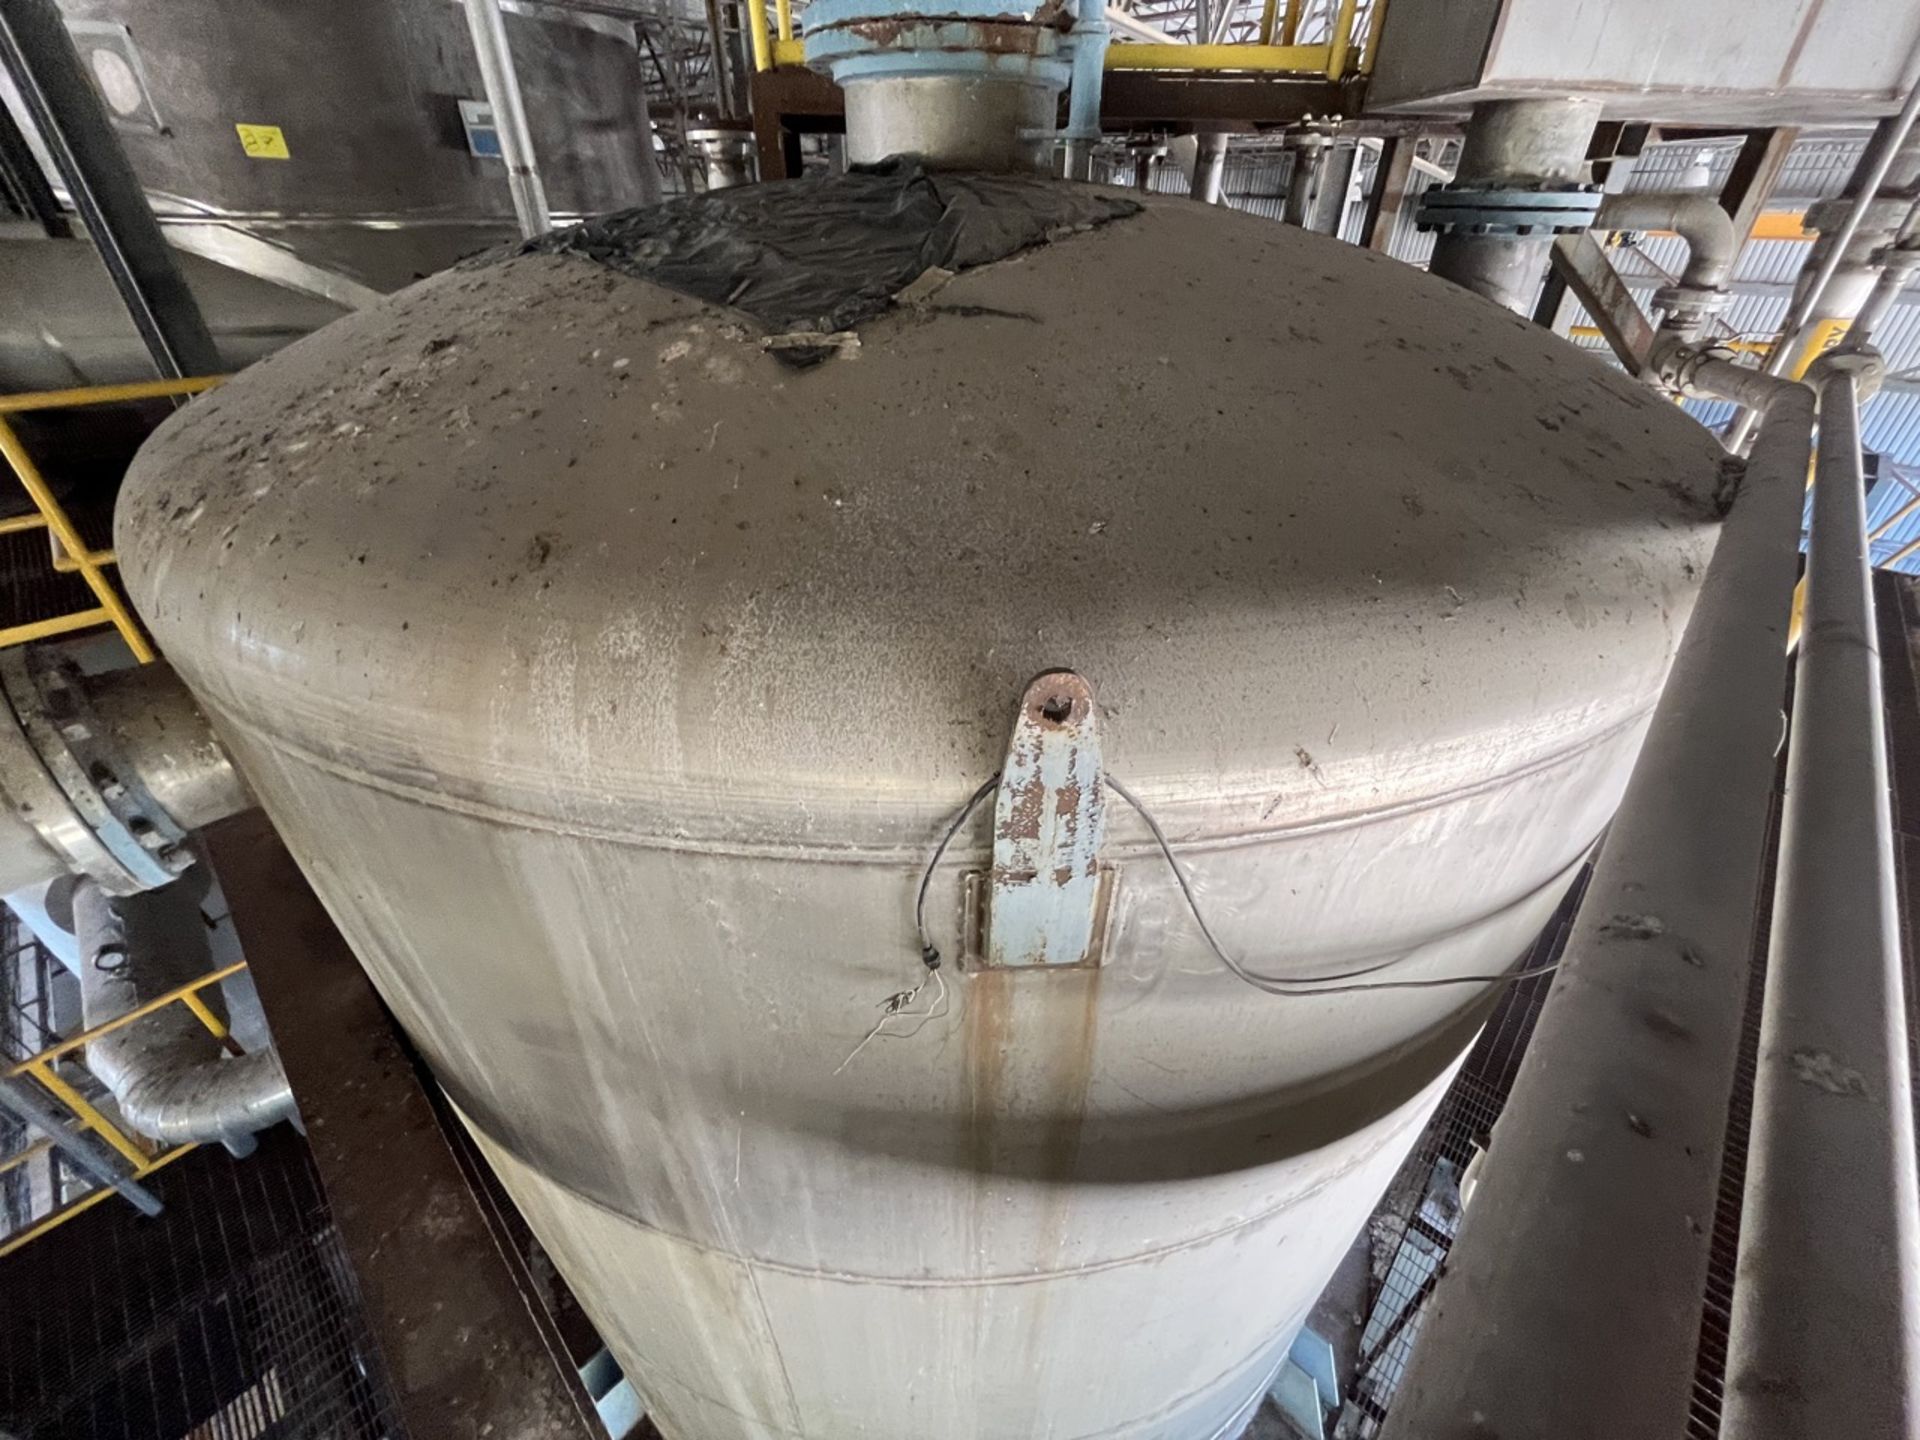 Conical storage tank with stainless steel toriesferica lid measures approximately 4.30 meters in di - Image 10 of 37